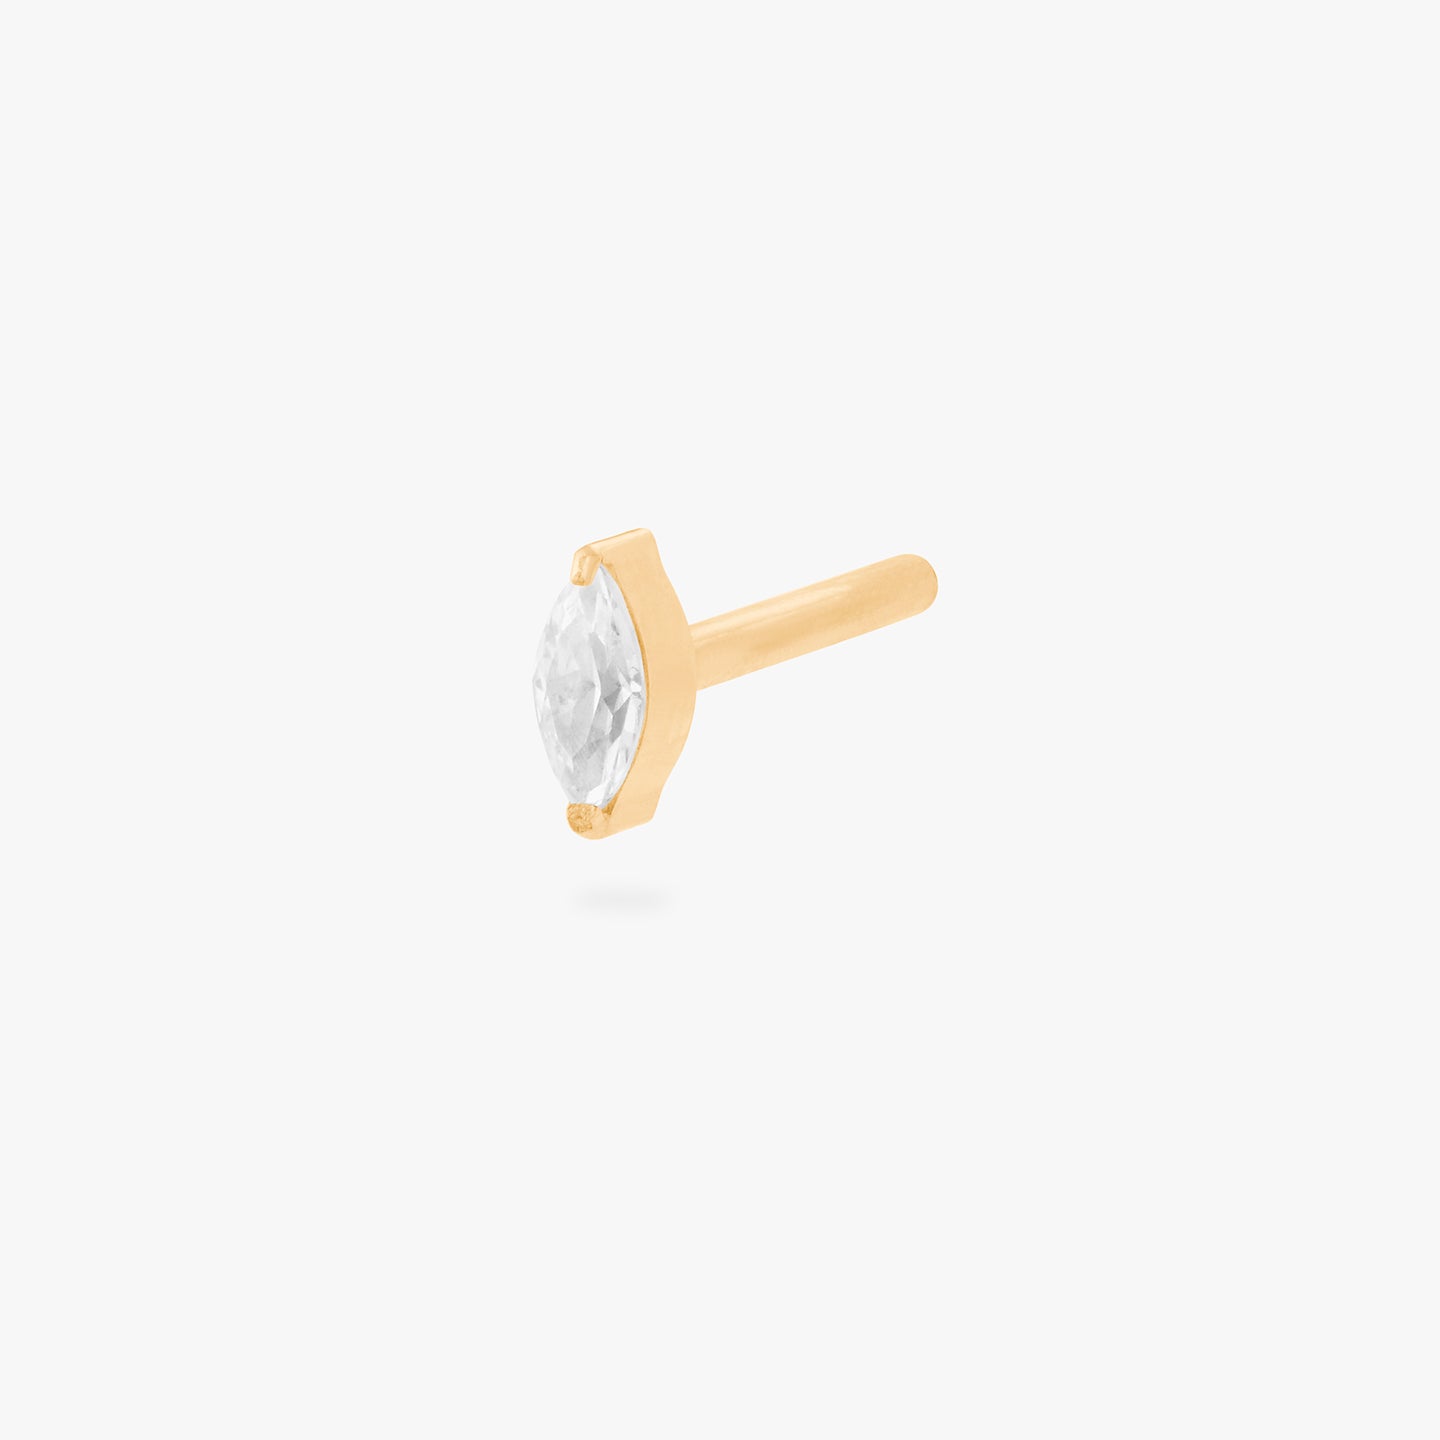 This is an image of a 6mm length gold/clear flatback post with a marquise shaped CZ disc. [hover] color:null|8mm